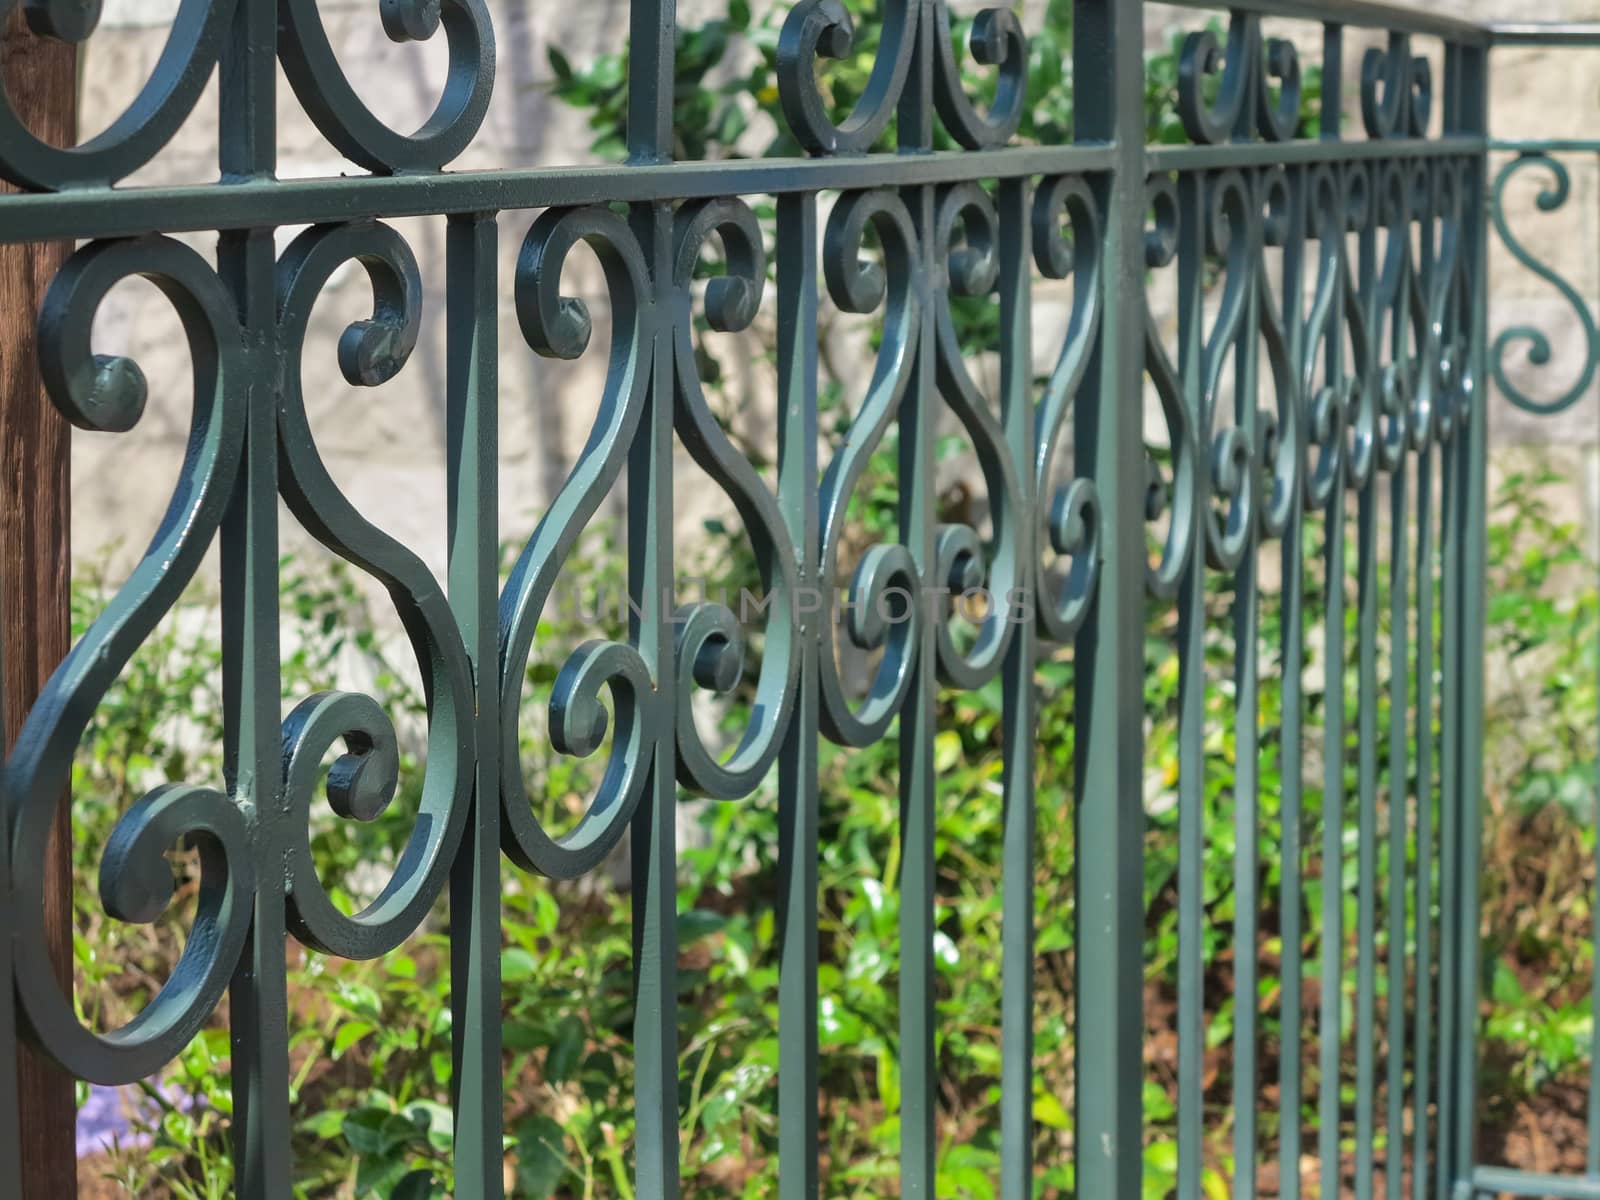 Green Iron Fence by quackersnaps